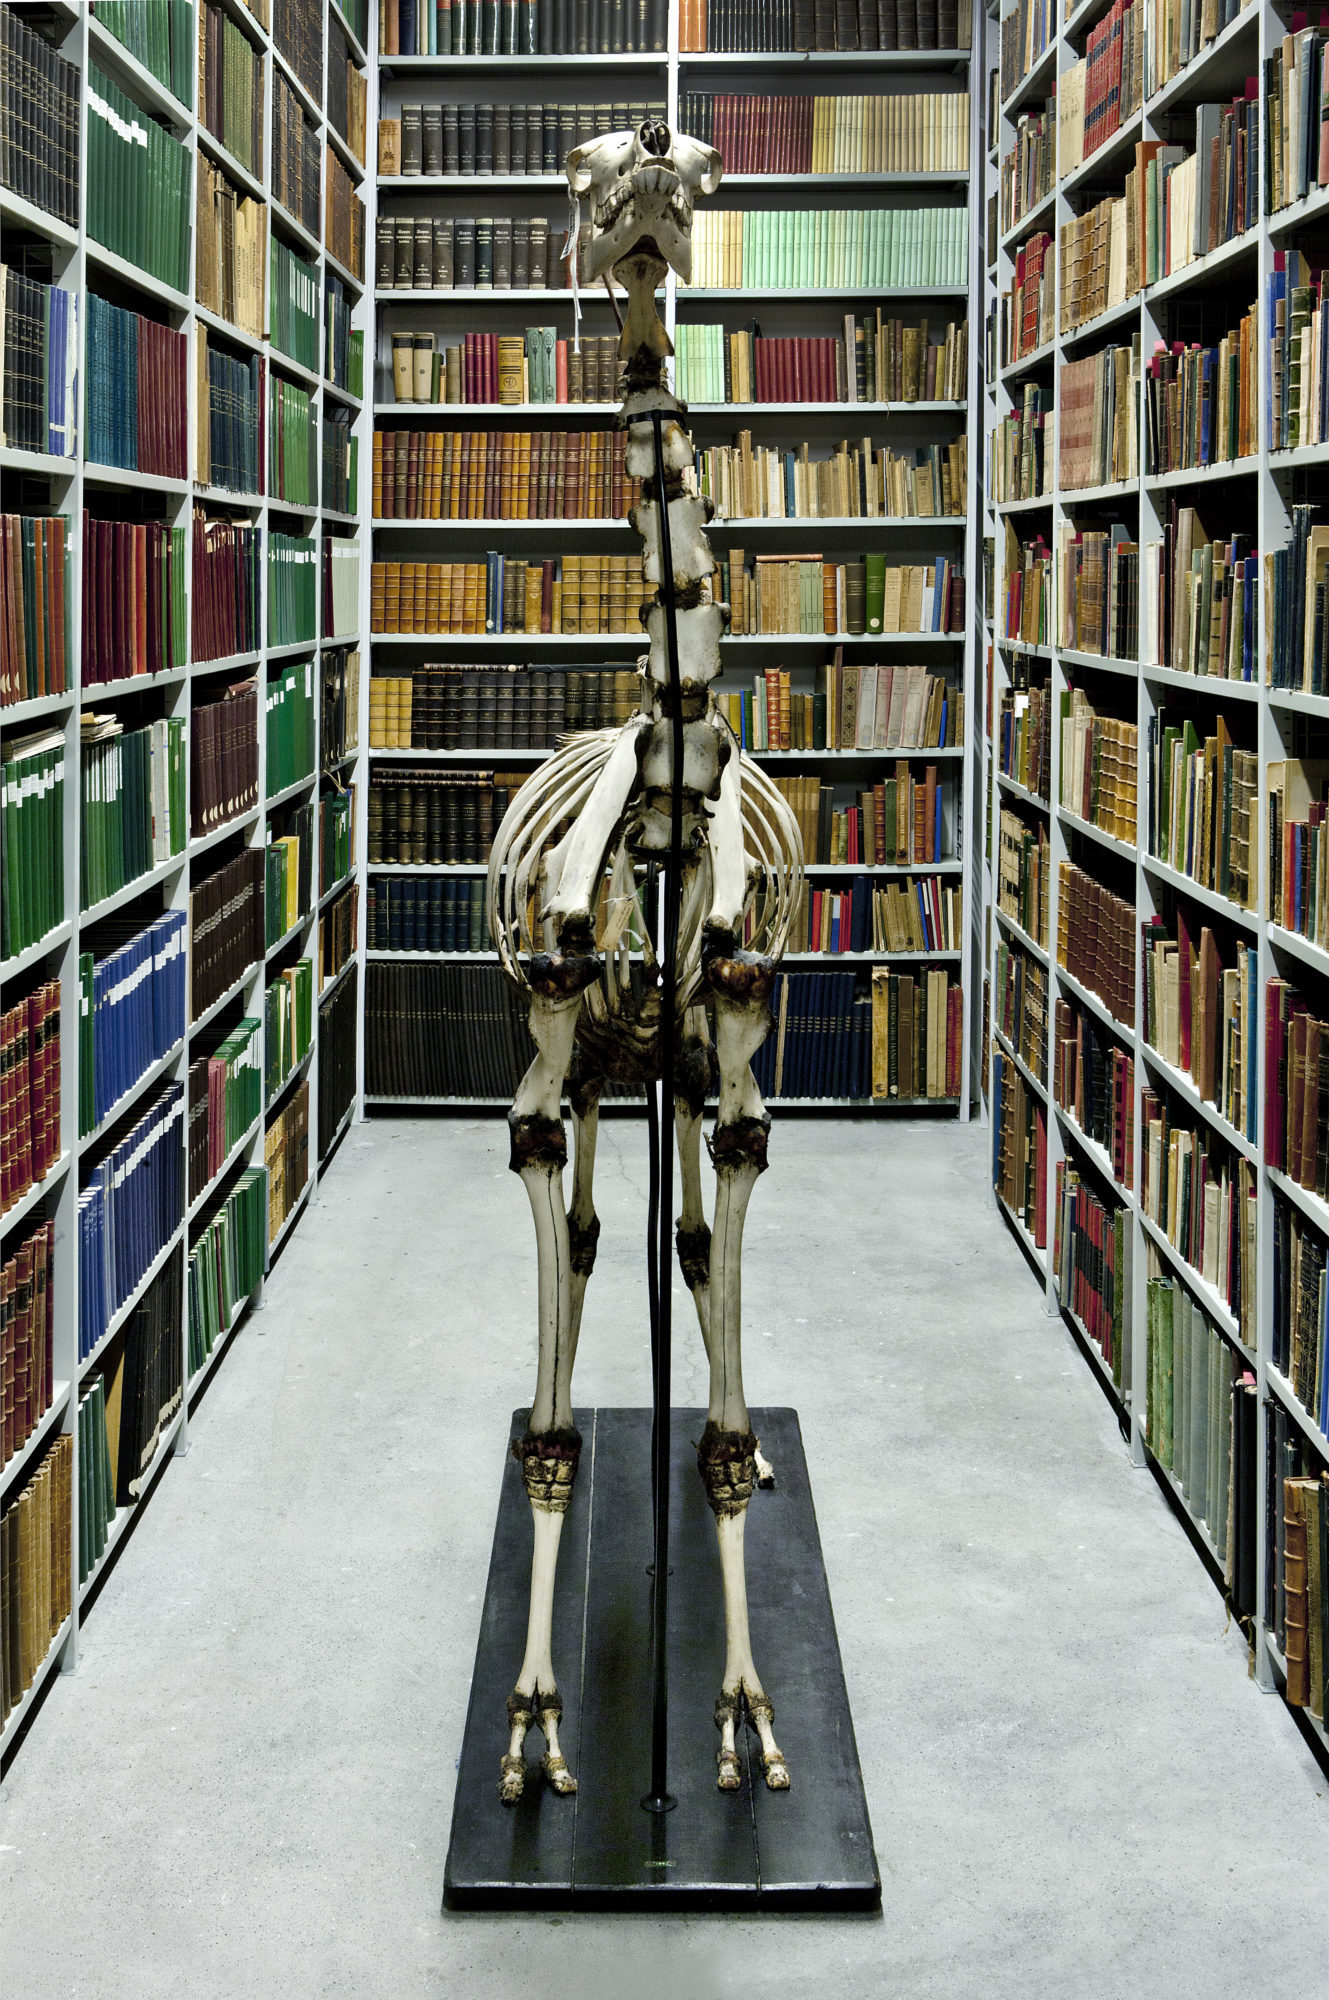 frontall view of an animal skeleton in a library